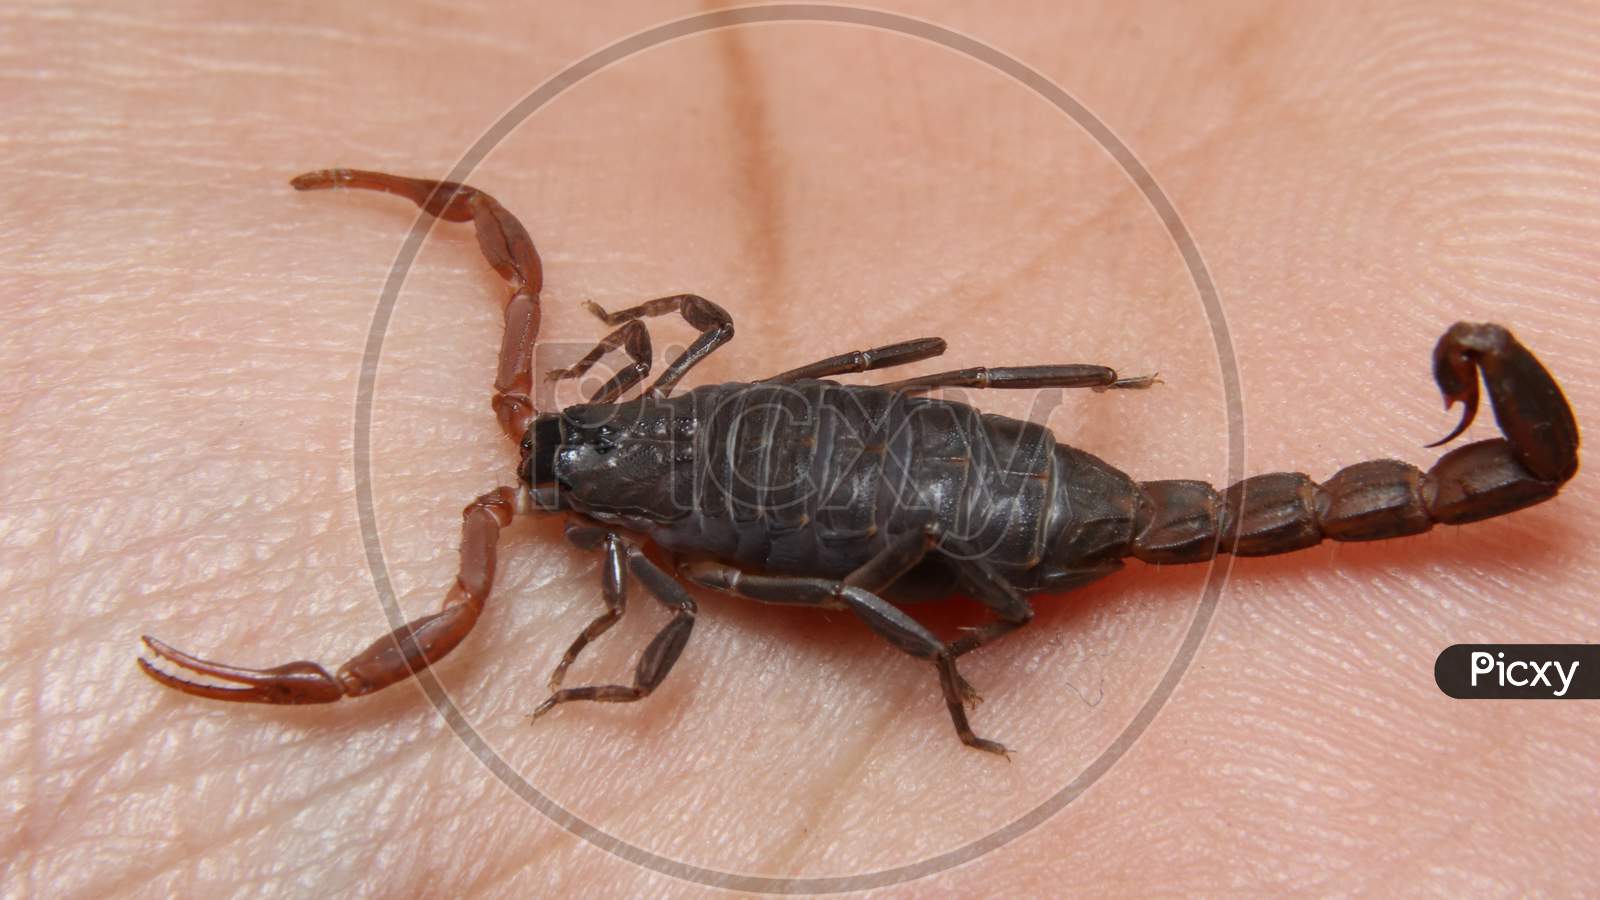 a baby scorpion on hand